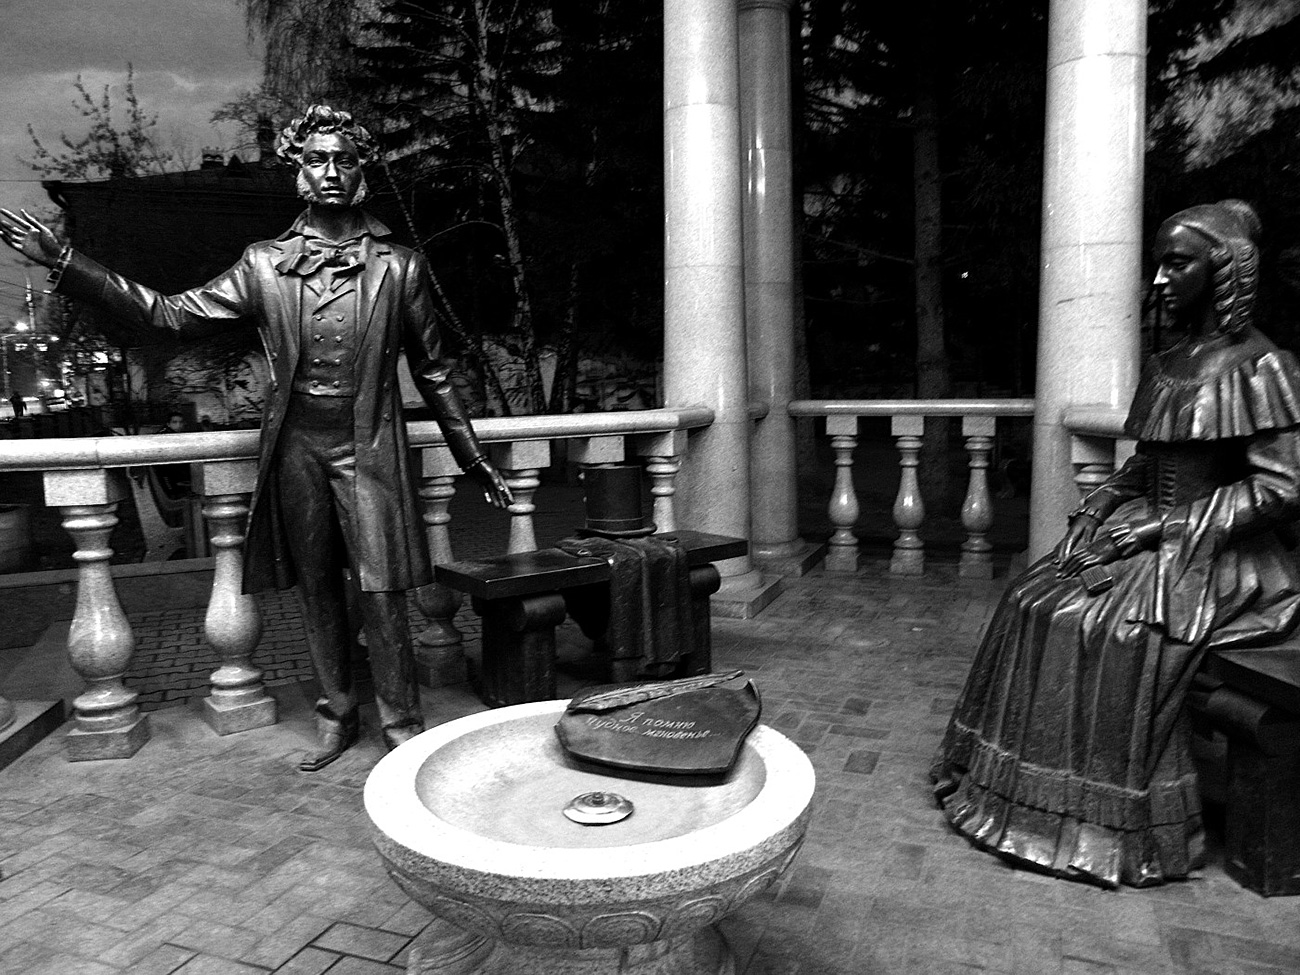 A monument featuring Alexander Pushkin and his wife Natalia Goncharova in Krasnoyarsk says: “I still recall the wondrous moment…” The poem continues:  “When you appeared before my sight/ As though a brief omen, /Pure phantom in enchanting light.” In truth, it was not to his wife (left) that Pushkin dedicated these verses.